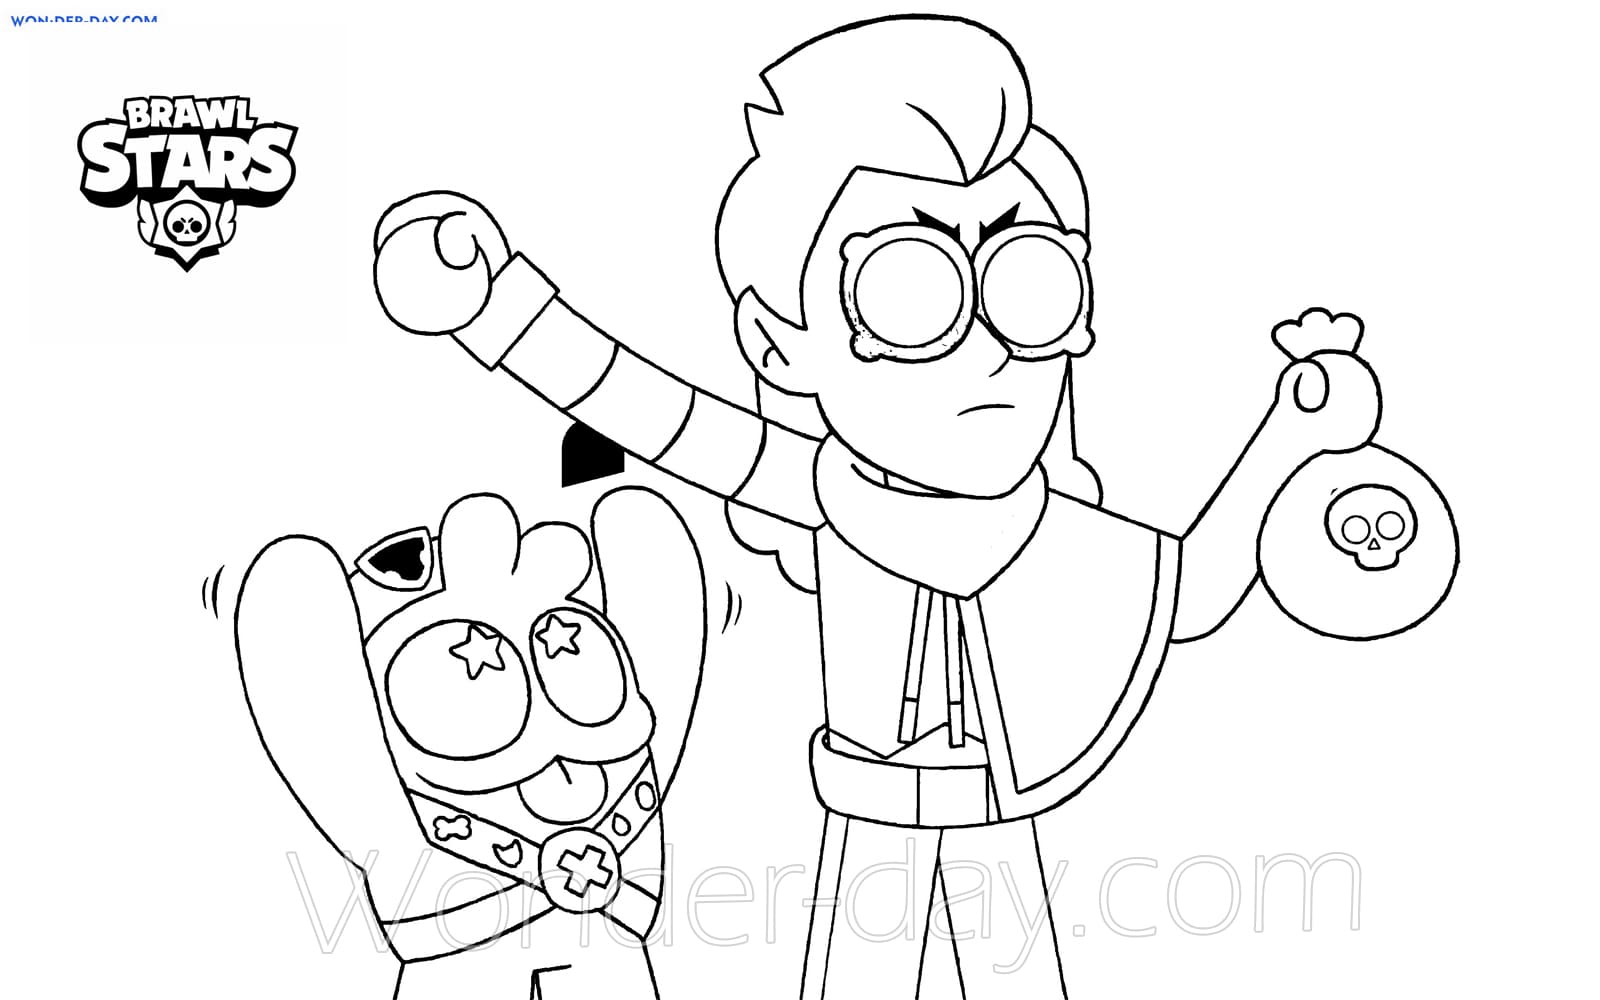 Squeak Brawl Stars Coloring Pages Wonder Day Coloring Pages For Children And Adults - stick brawl stars para colorear